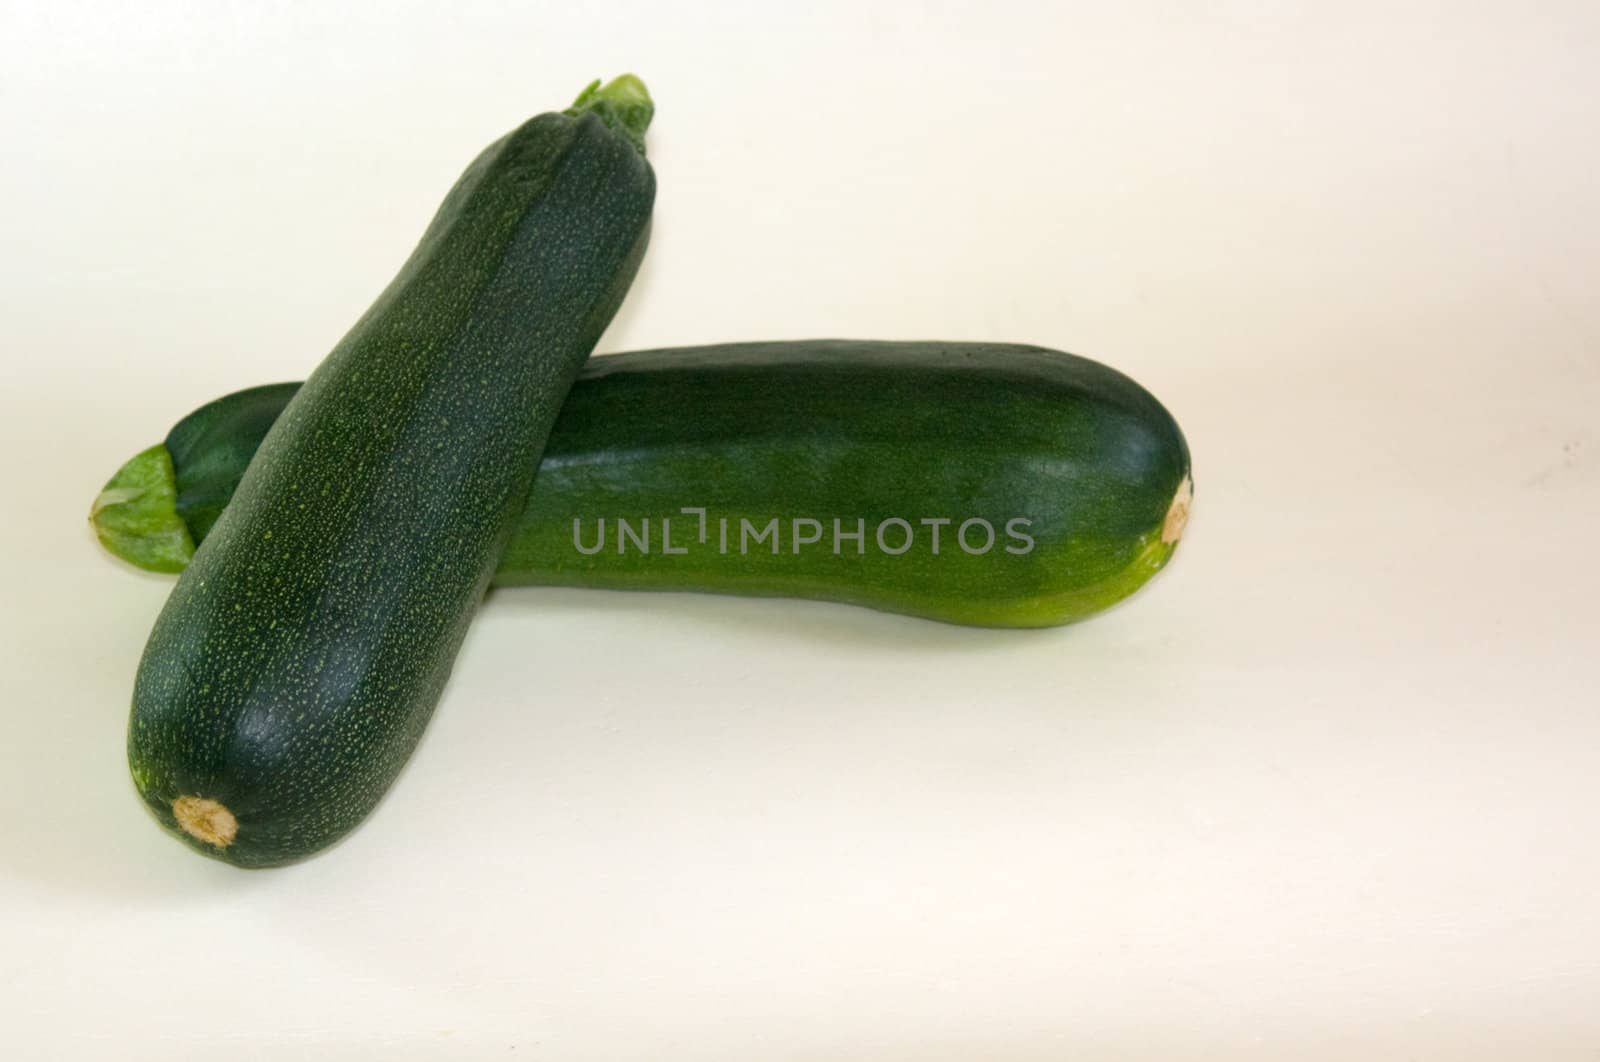 Two green vegetable marrows on a white background